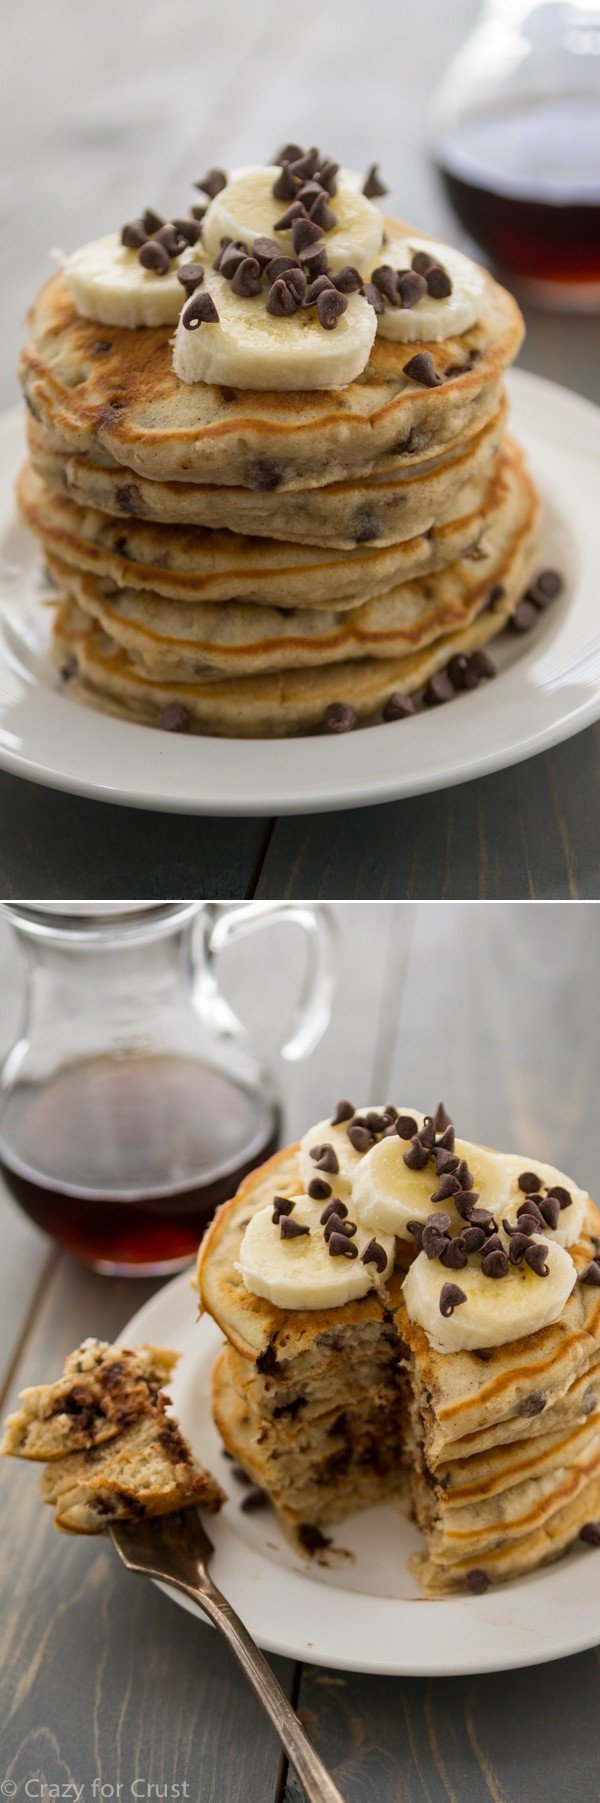 Banana Chocolate Chip Pancakes - the perfect breakfast or brunch!